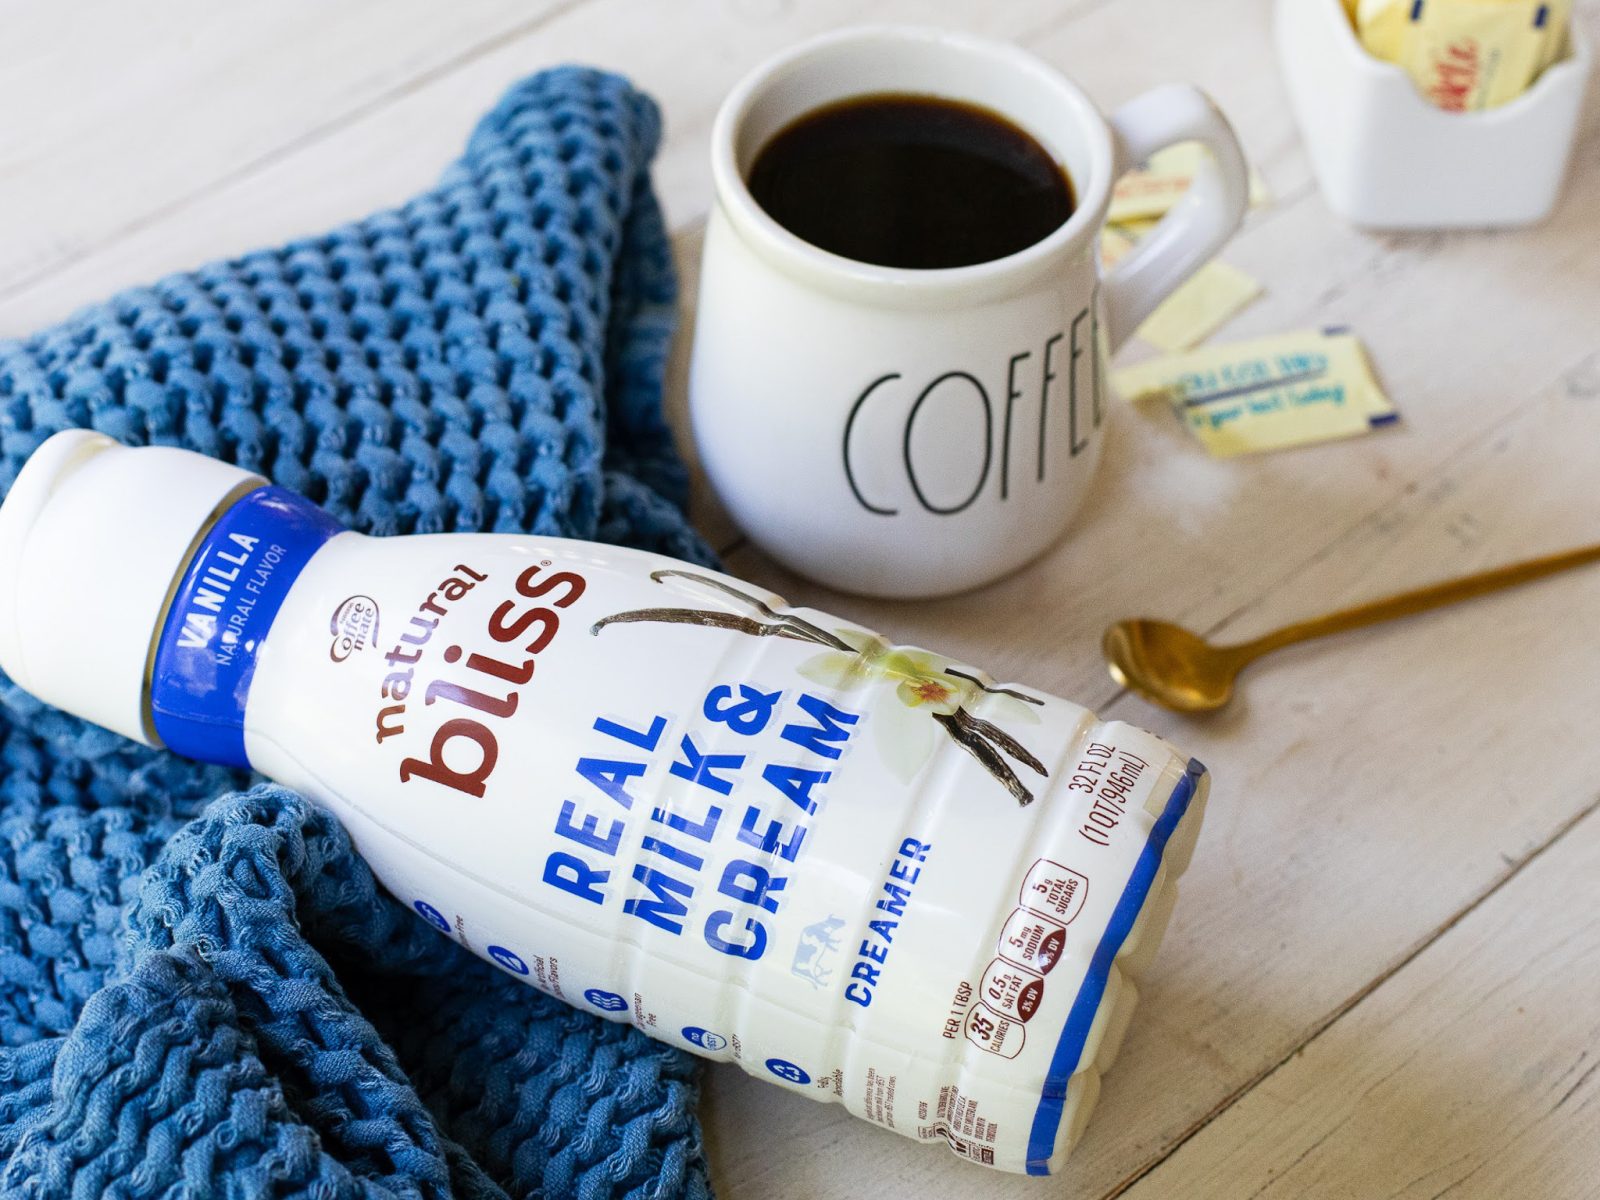 Get Natural Bliss Creamer For As Low As $2.74 At Kroger